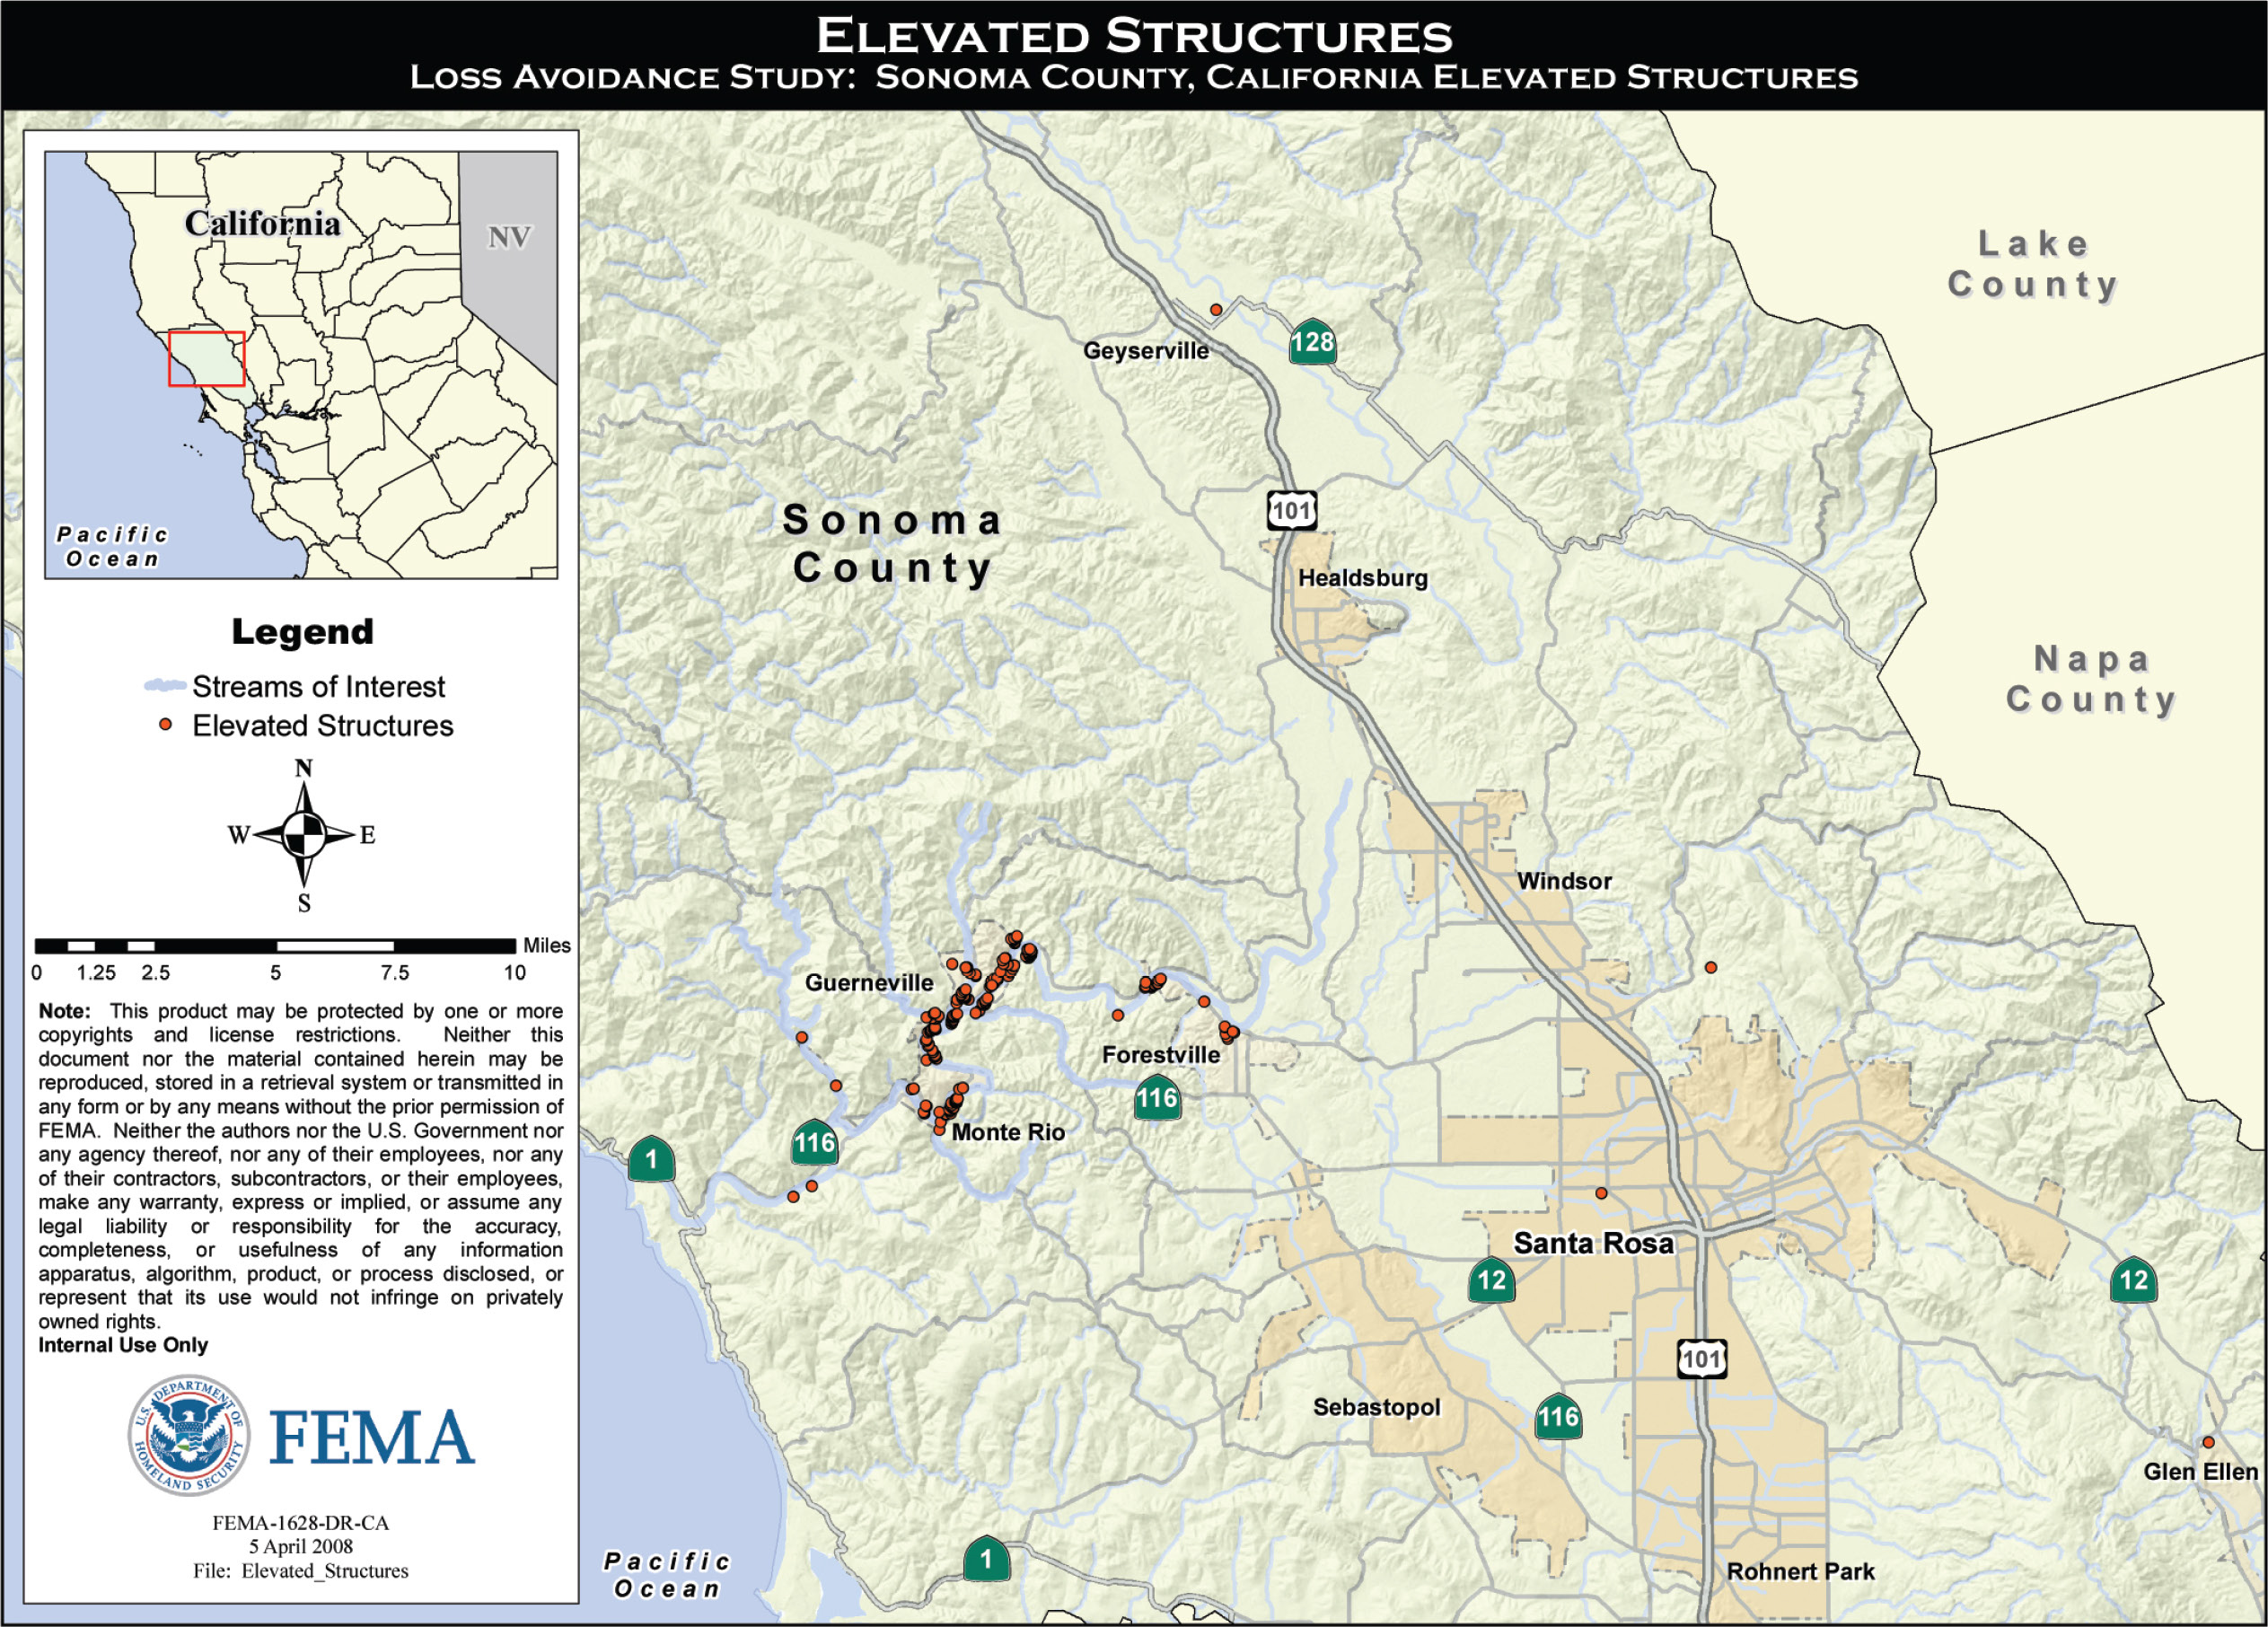 Elevated Structures. Loss Avoidance Study: Sonoma County, California Elevated Structures. Legend shows streams of interest; elevated structures. FEMA-1628-DR-CA. 5 April 2008; File: Elevated_Structures.